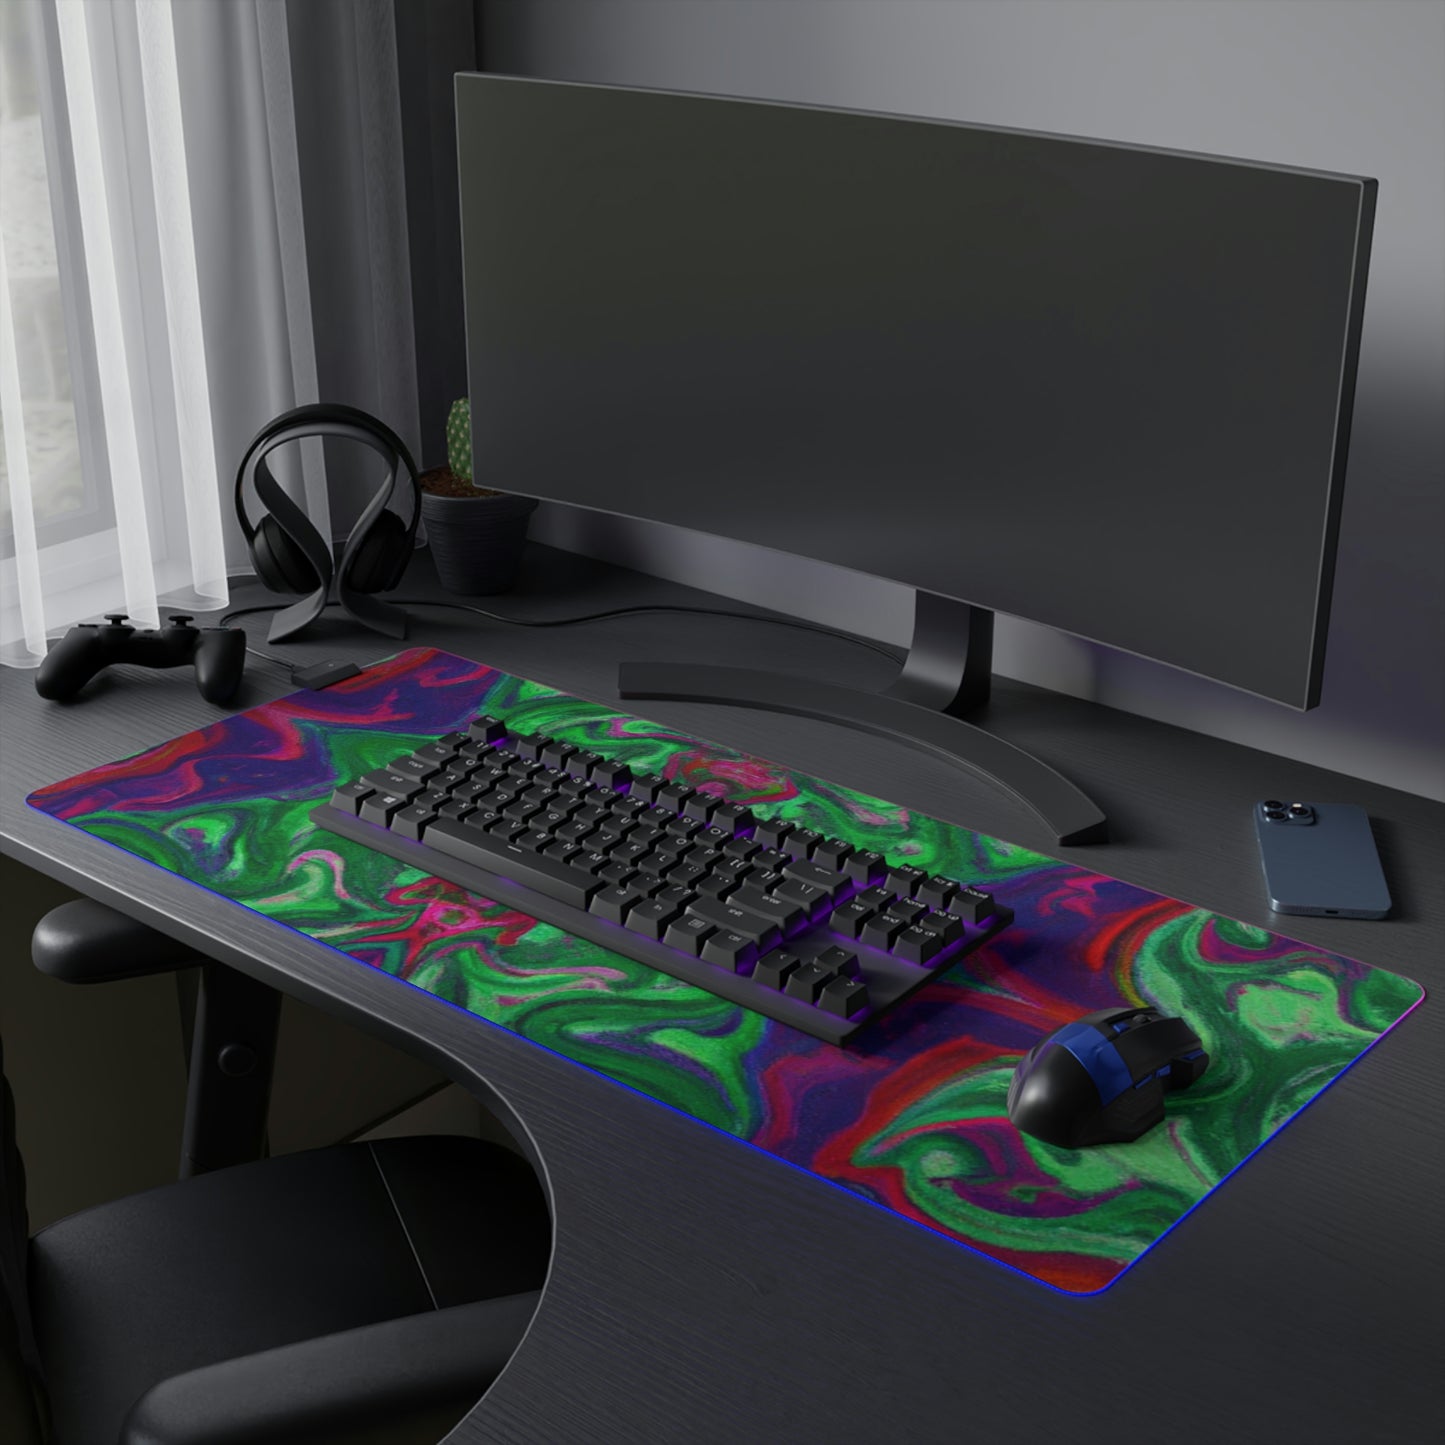 Rocko "The Rocket" Rigby - Psychedelic Trippy LED Light Up Gaming Mouse Pad